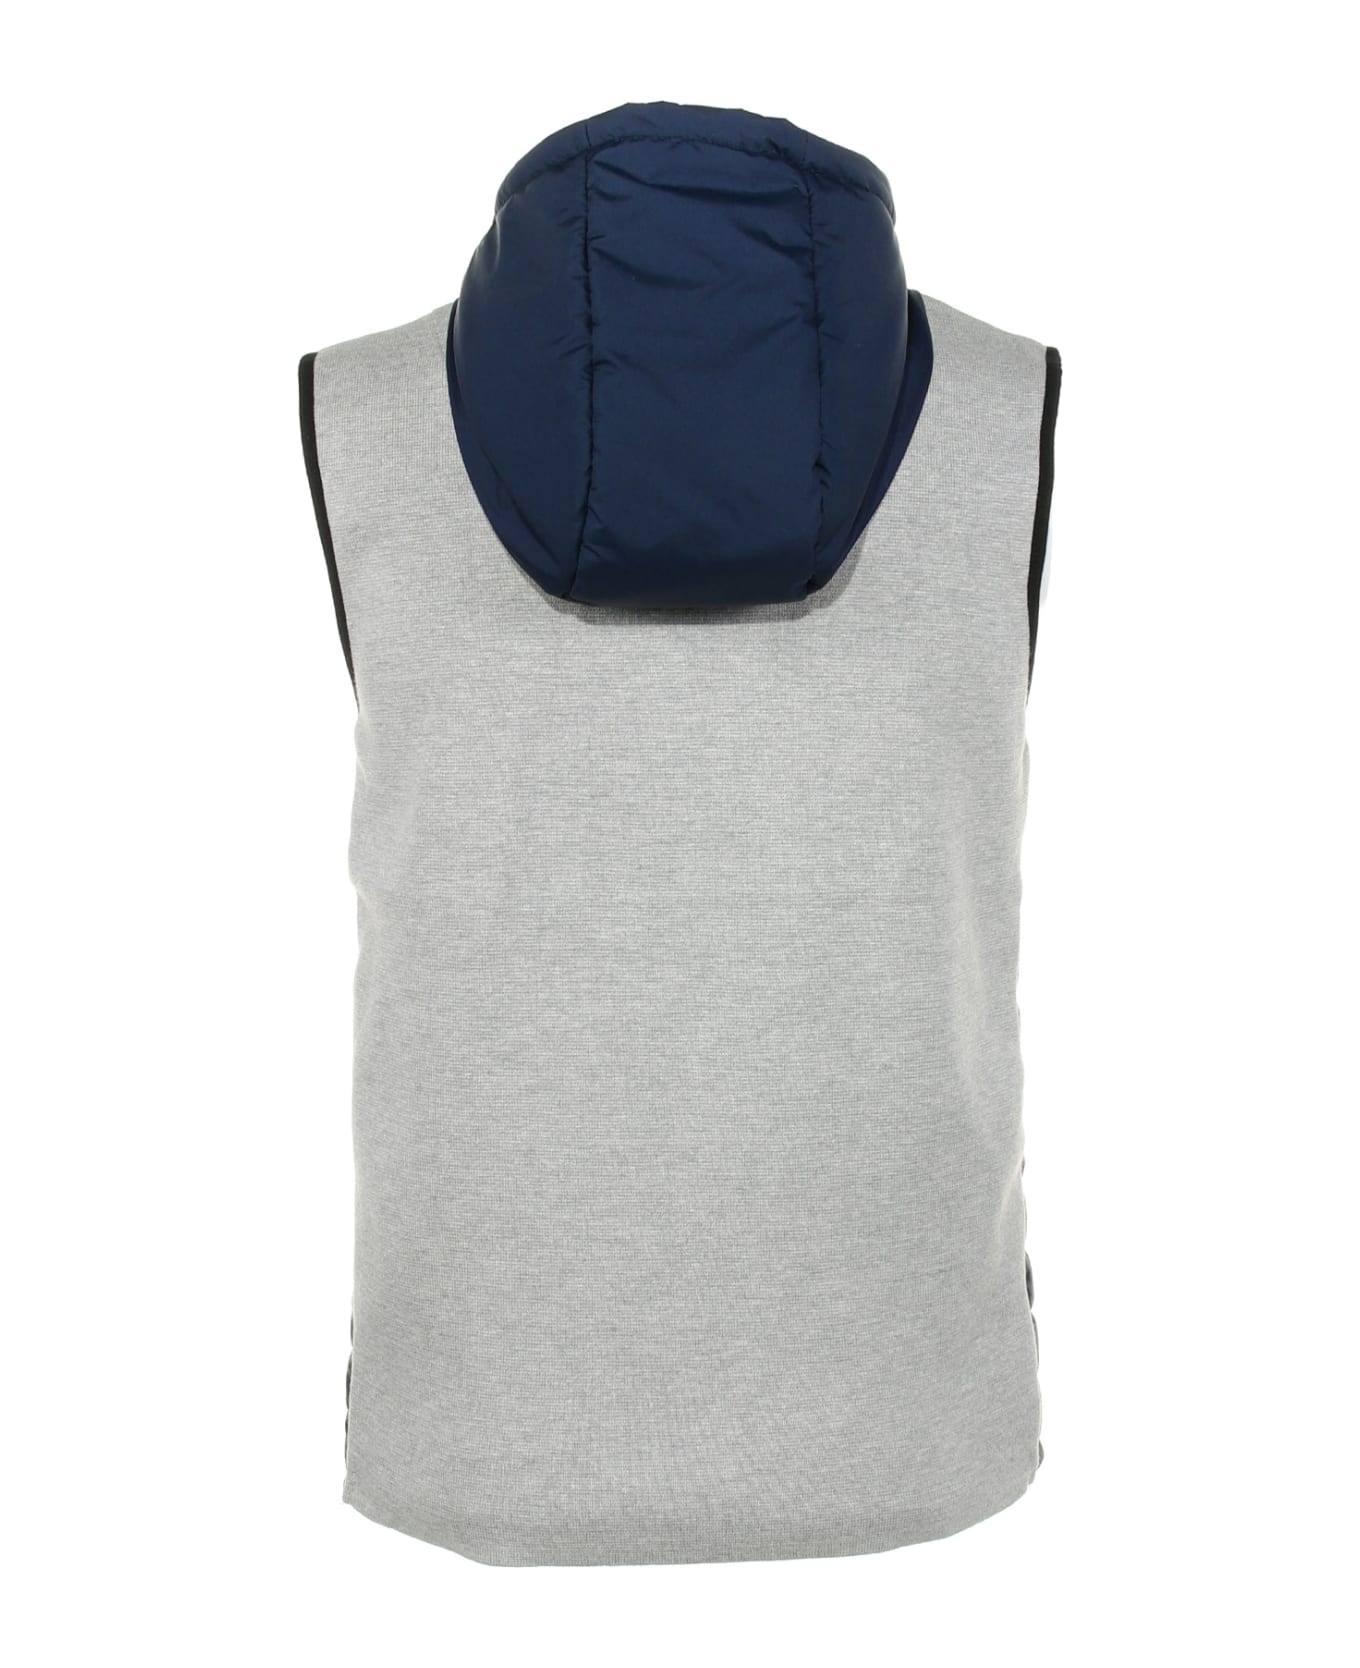 Ecoalf Quilted Vest With Hood - MIDNIGHT NAVY